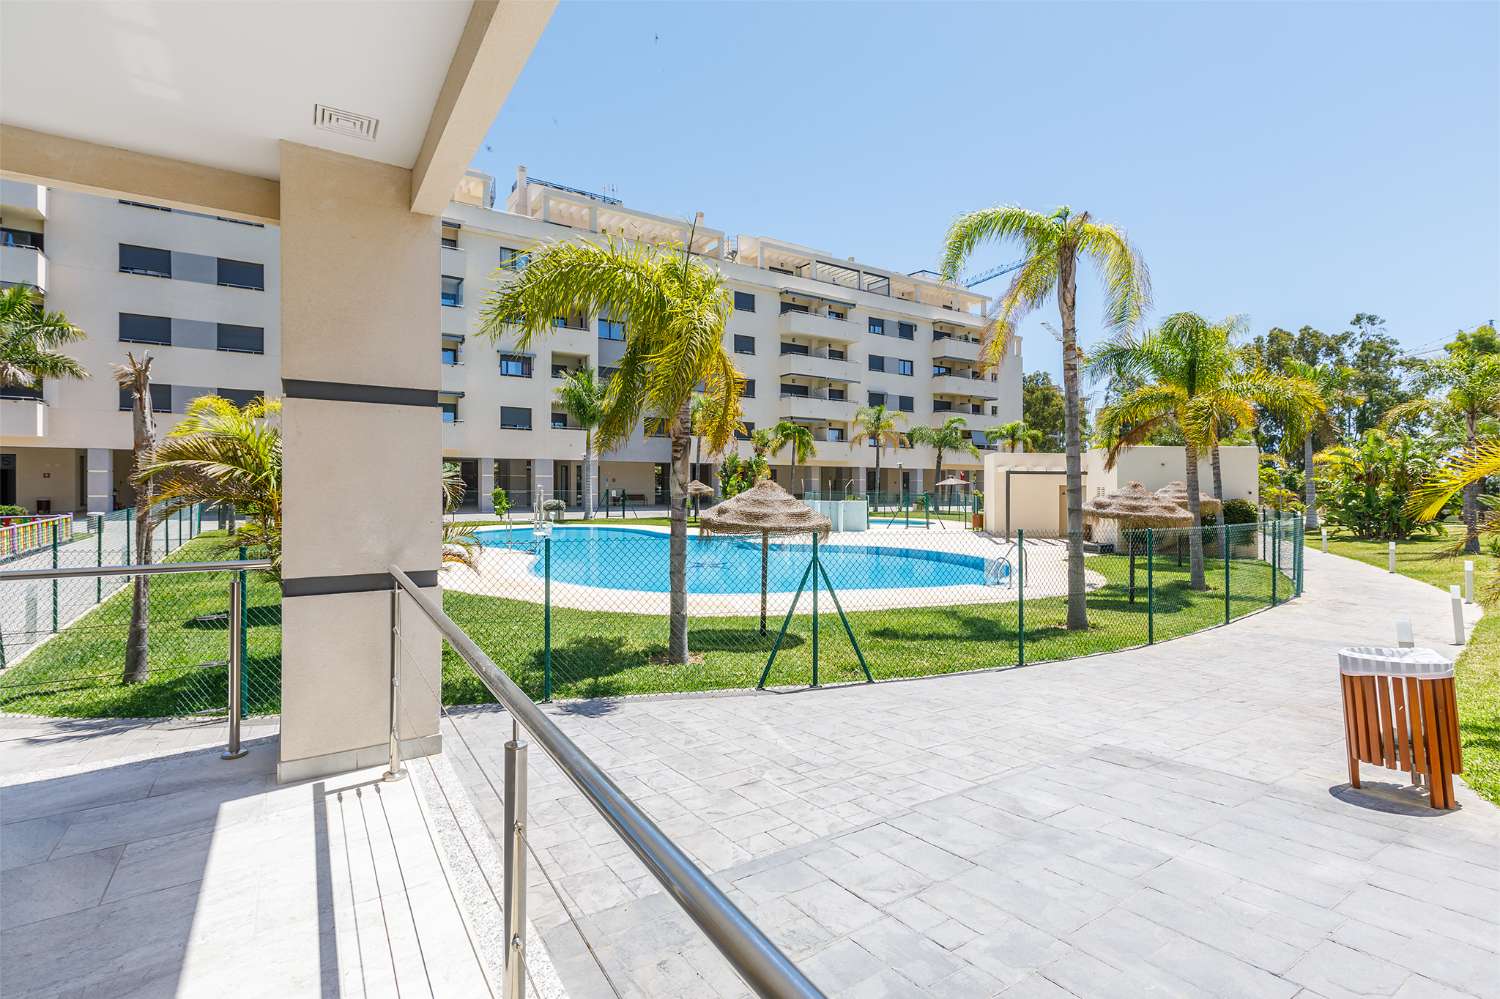 3 bedroom apartment, with parking, community pool, wifi and air-conditioning